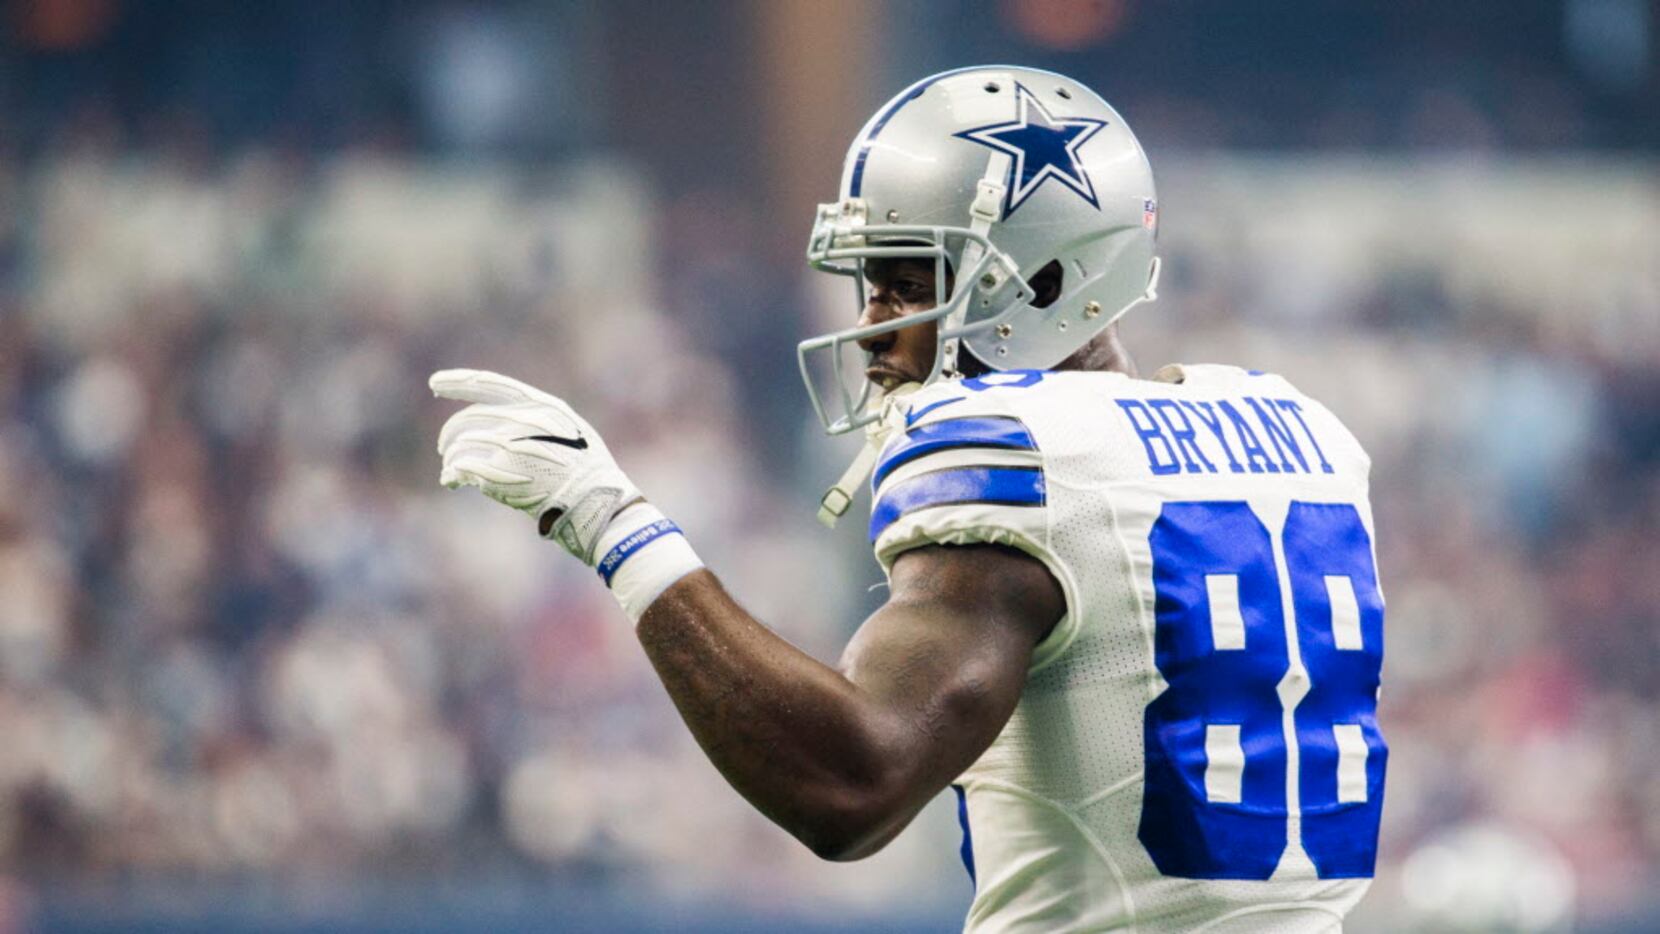 Route guru: Here's where Dez needs to improve, and here's how Cowboys could  help him succeed